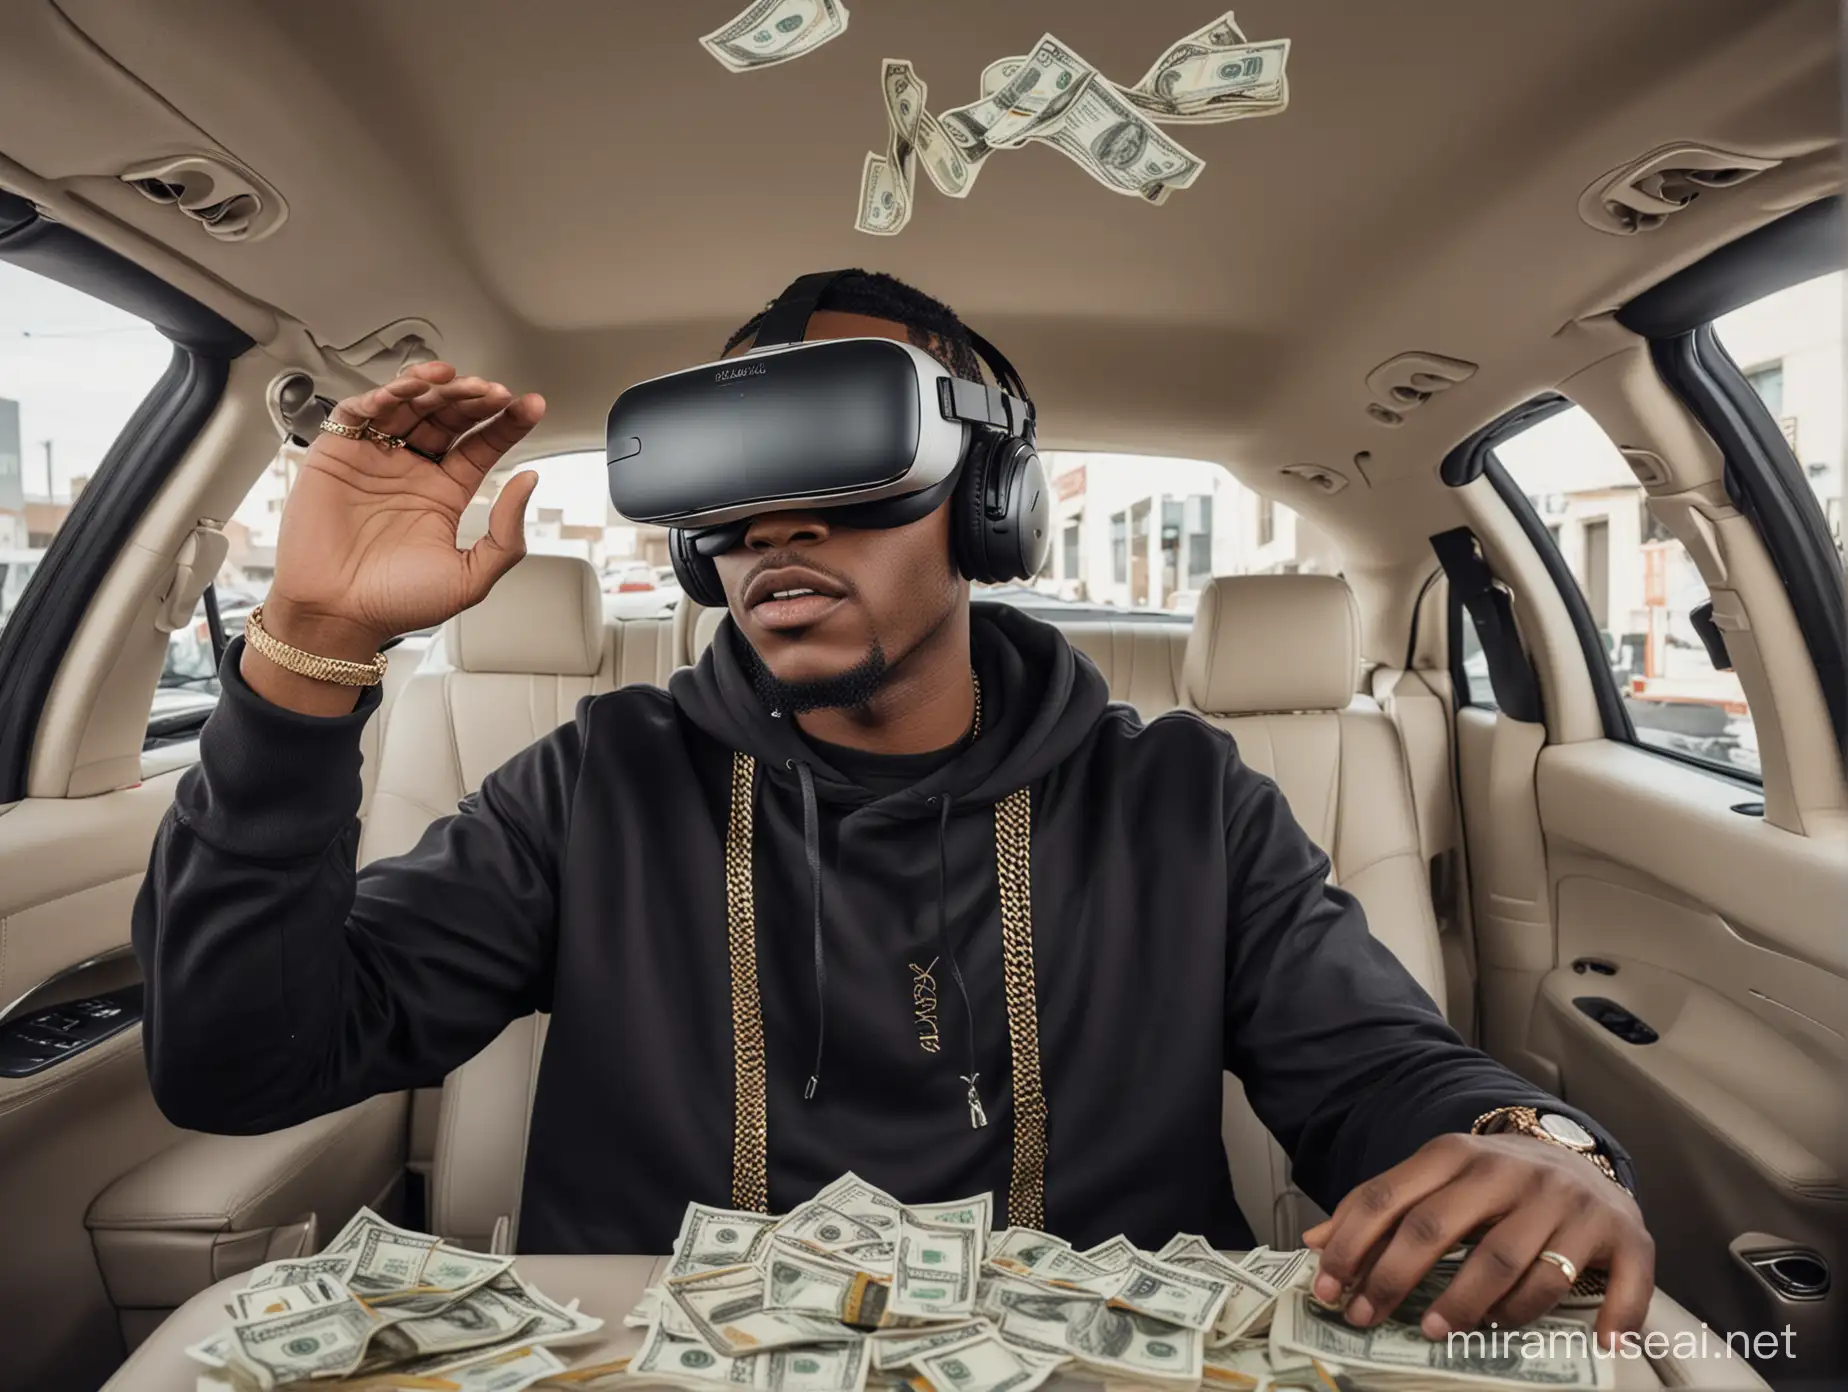 Luxury Car Interior with Black Rapper Wearing VR Headset Amidst Stacks of Dollar Bills